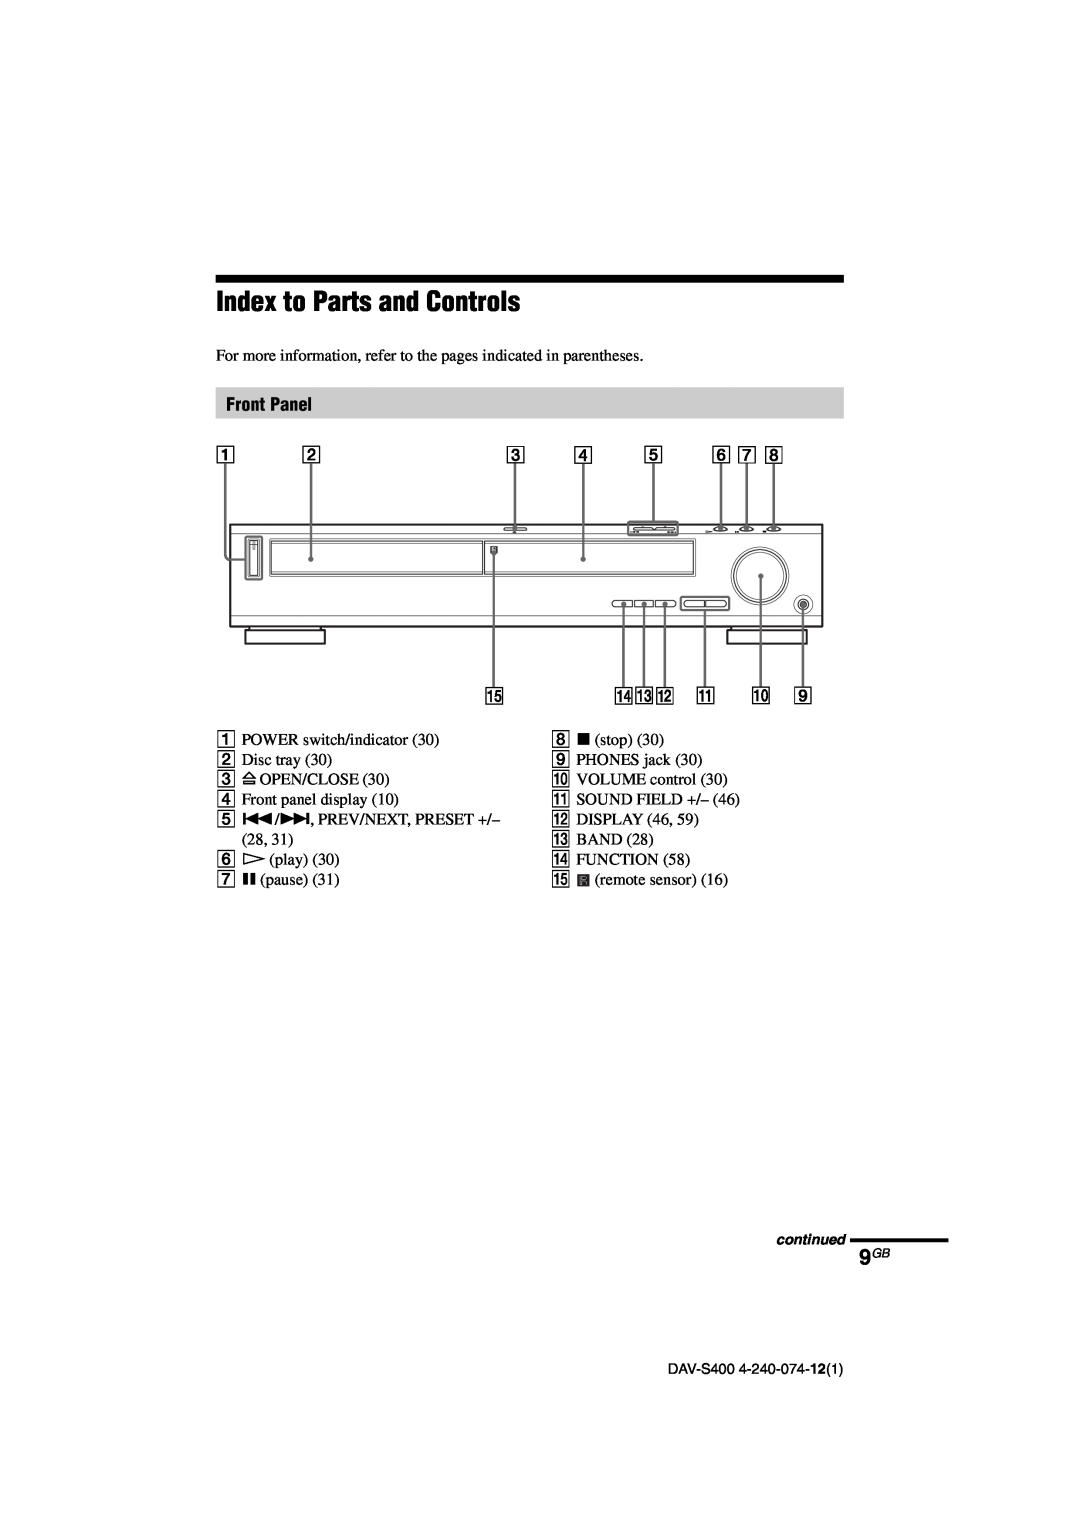 Sony DAV-S400 manual Index to Parts and Controls, Front Panel 